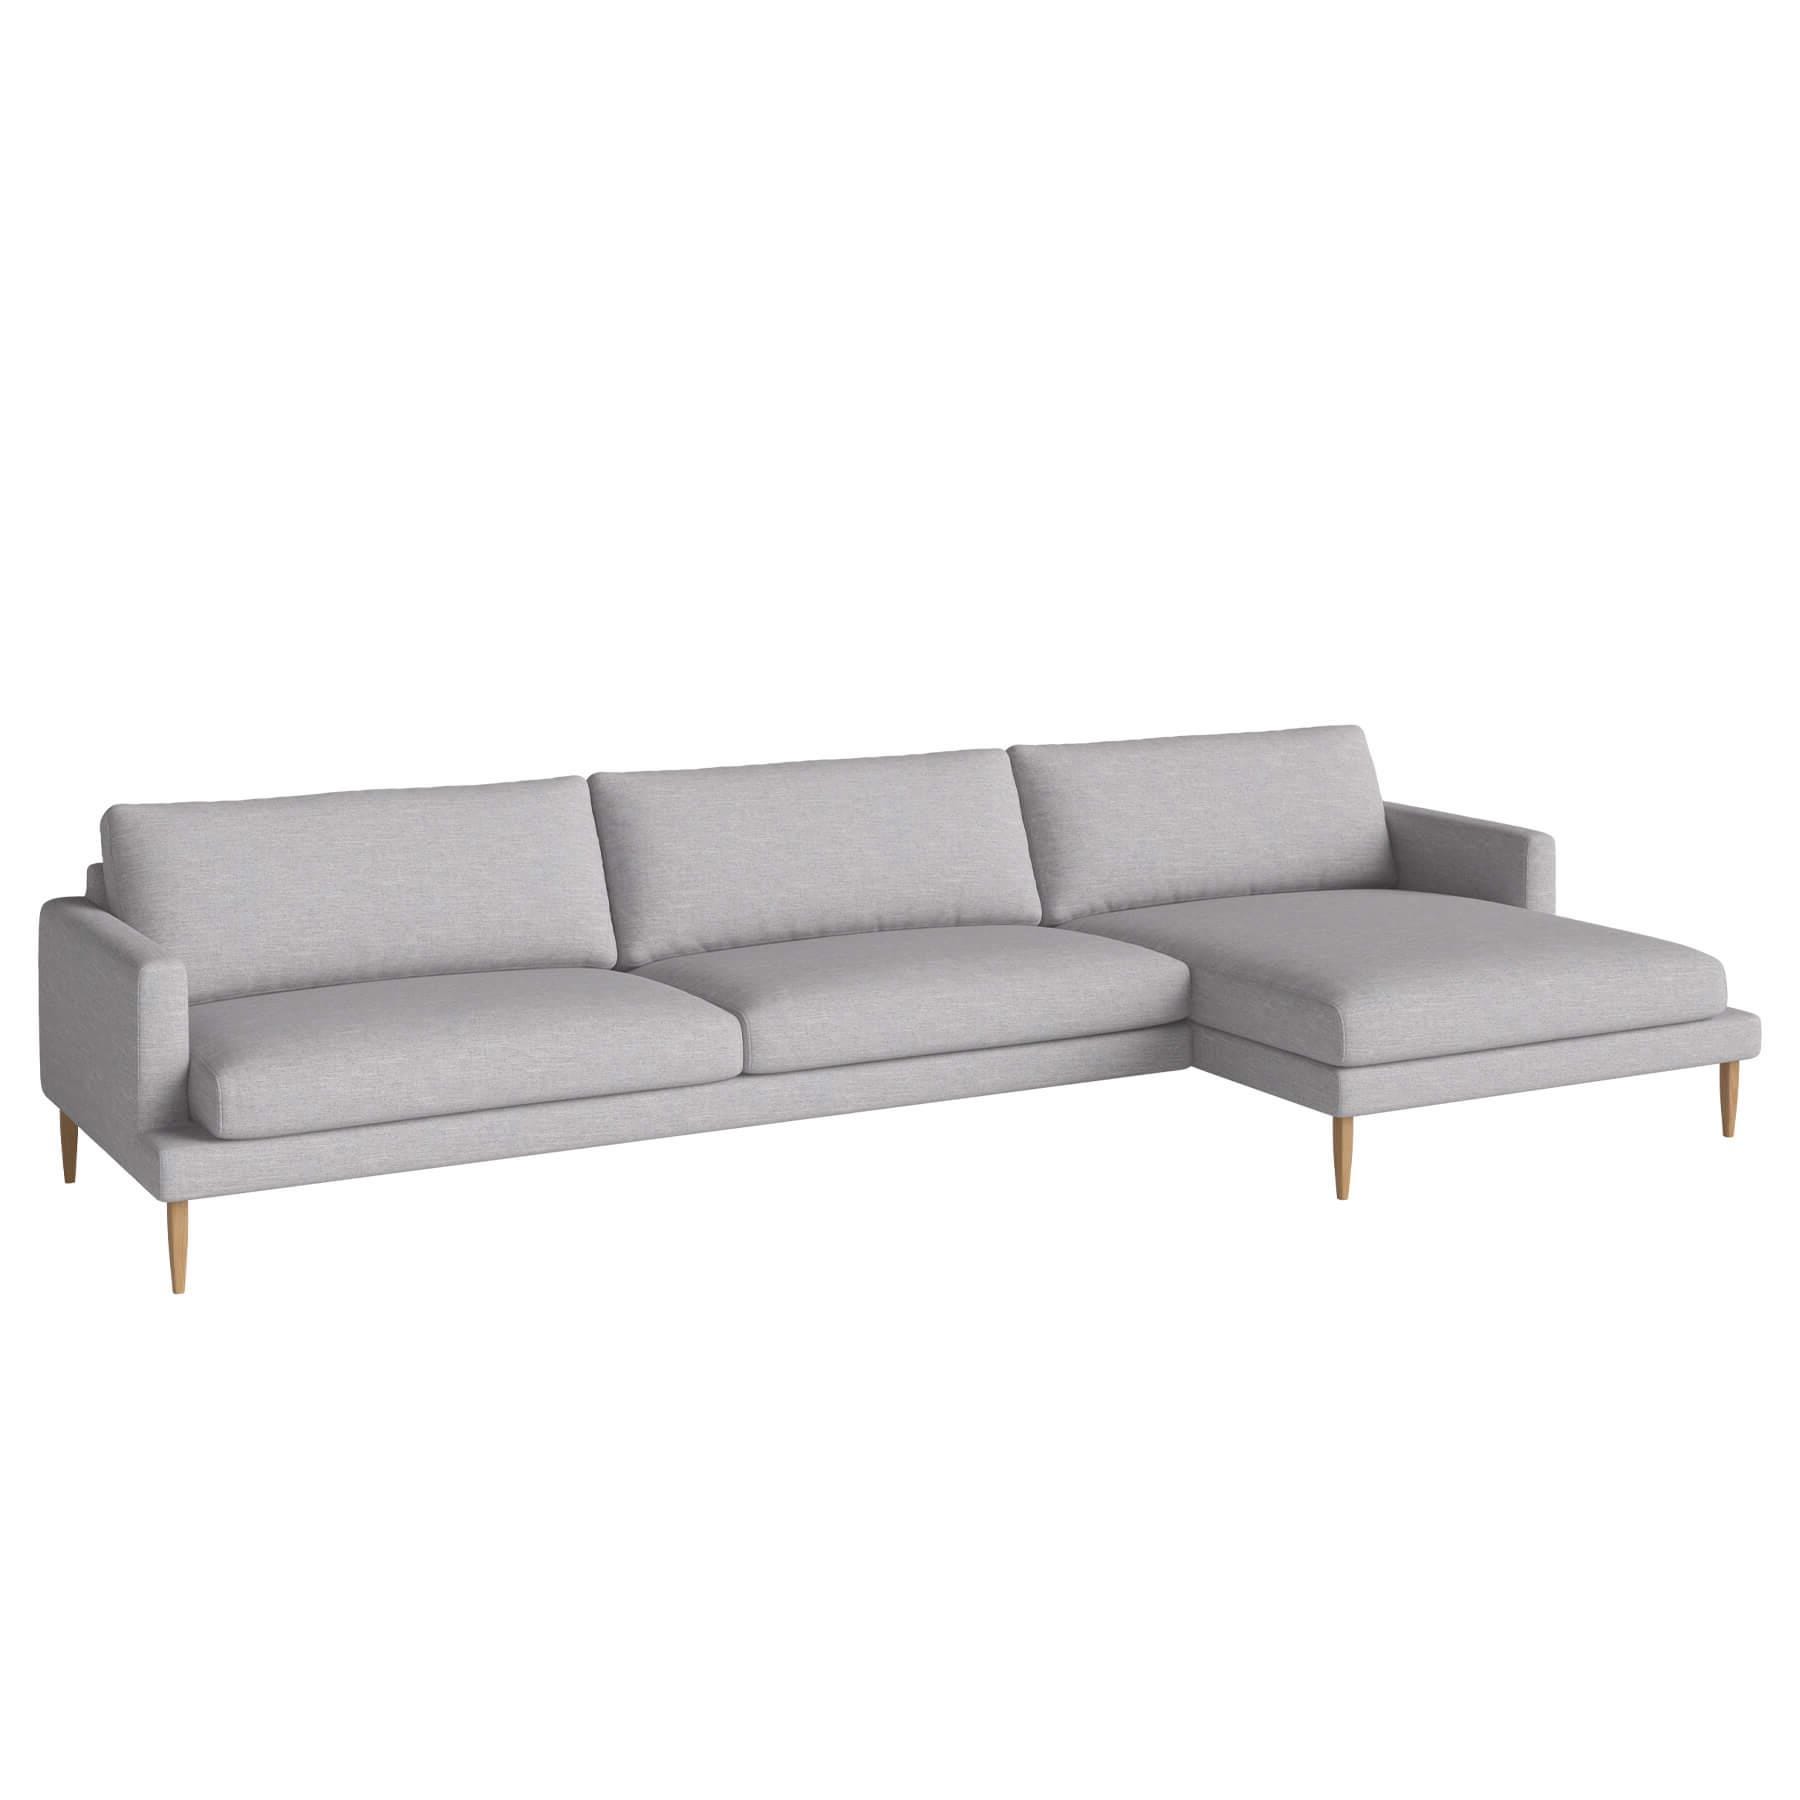 Bolia Veneda Sofa 45 Seater Sofa With Chaise Longue Oiled Oak Baize Light Grey Right Grey Designer Furniture From Holloways Of Ludlow